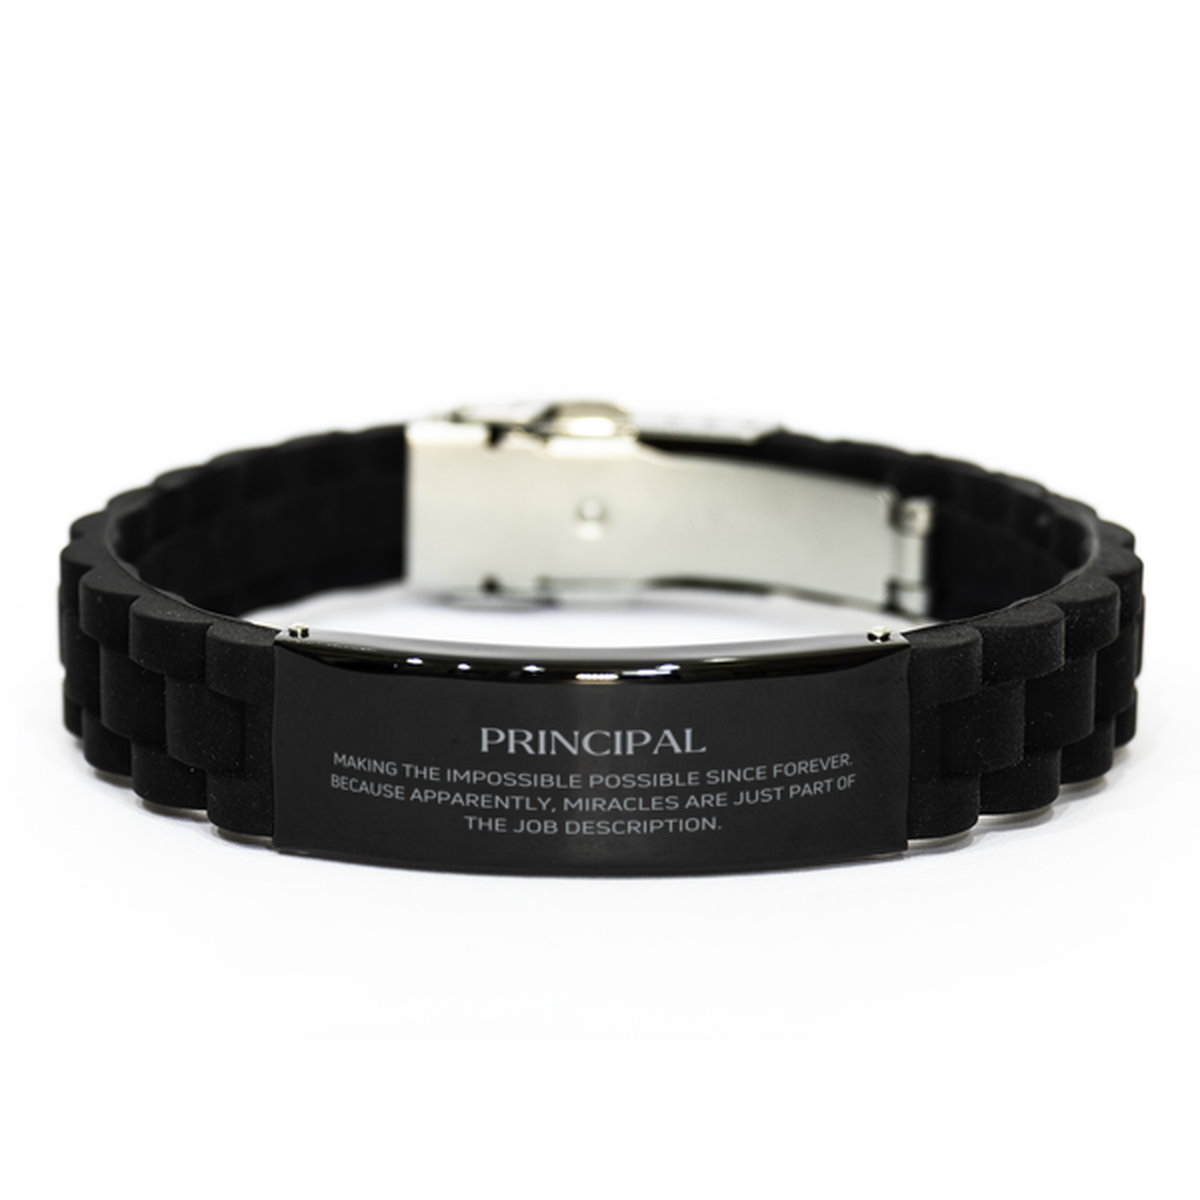 Funny Principal Gifts, Miracles are just part of the job description, Inspirational Birthday Black Glidelock Clasp Bracelet For Principal, Men, Women, Coworkers, Friends, Boss